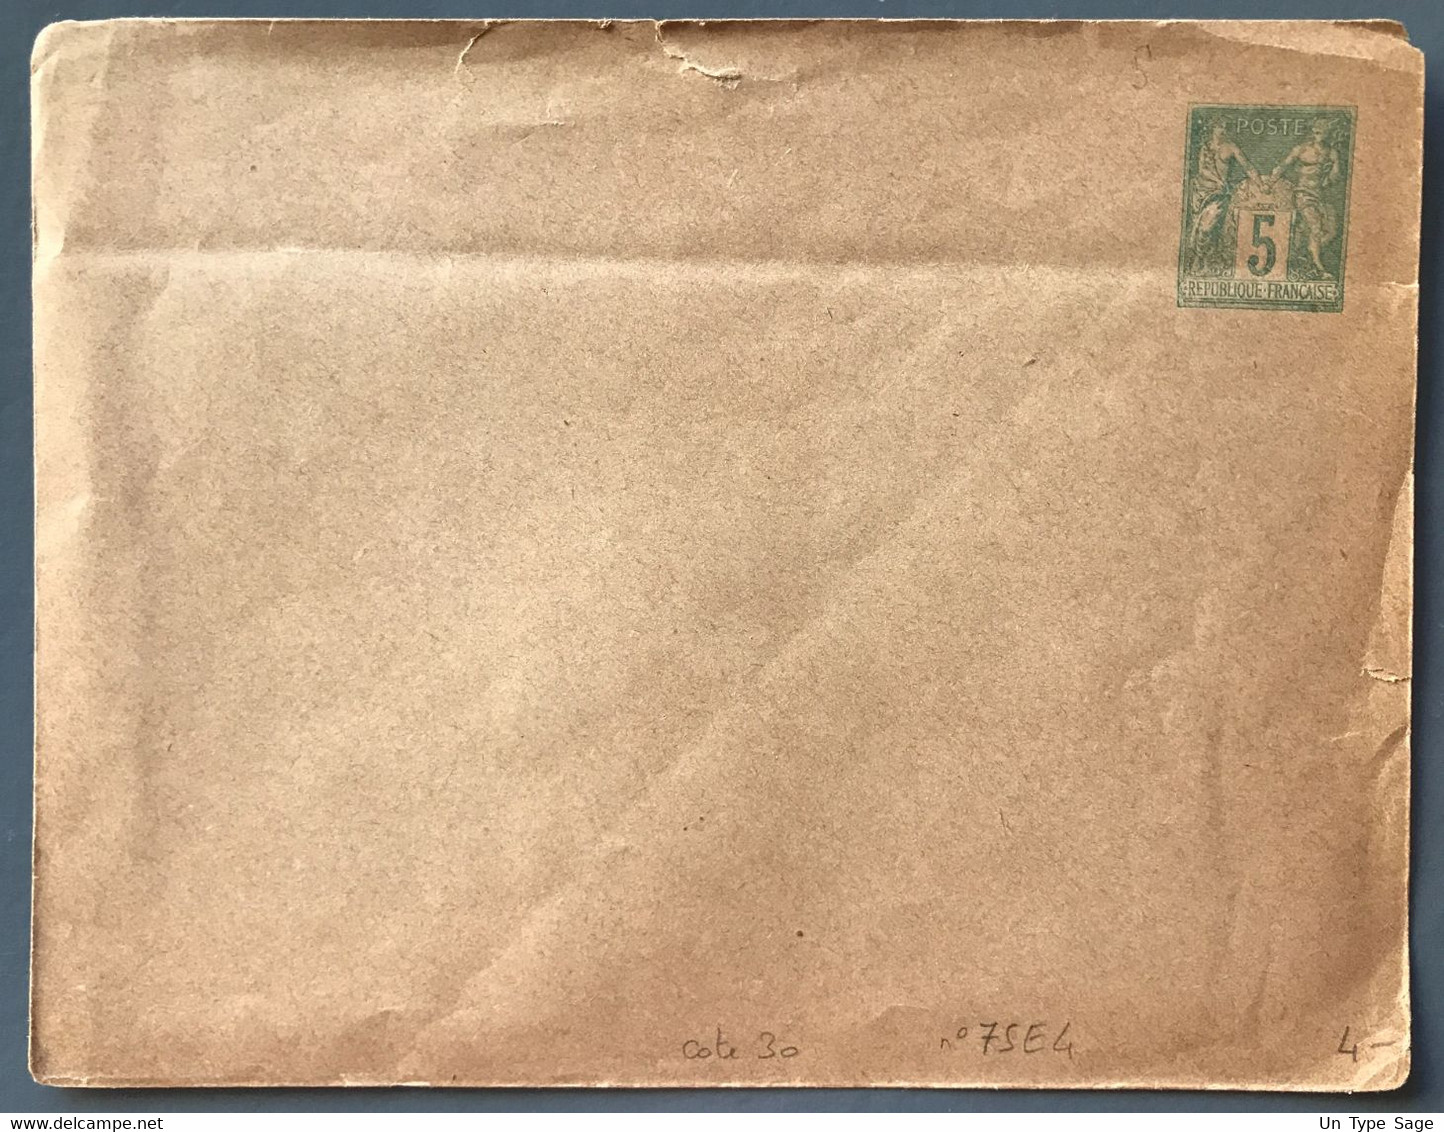 France Entier N°75-E4 - Neuf - (B3851) - Standard Covers & Stamped On Demand (before 1995)